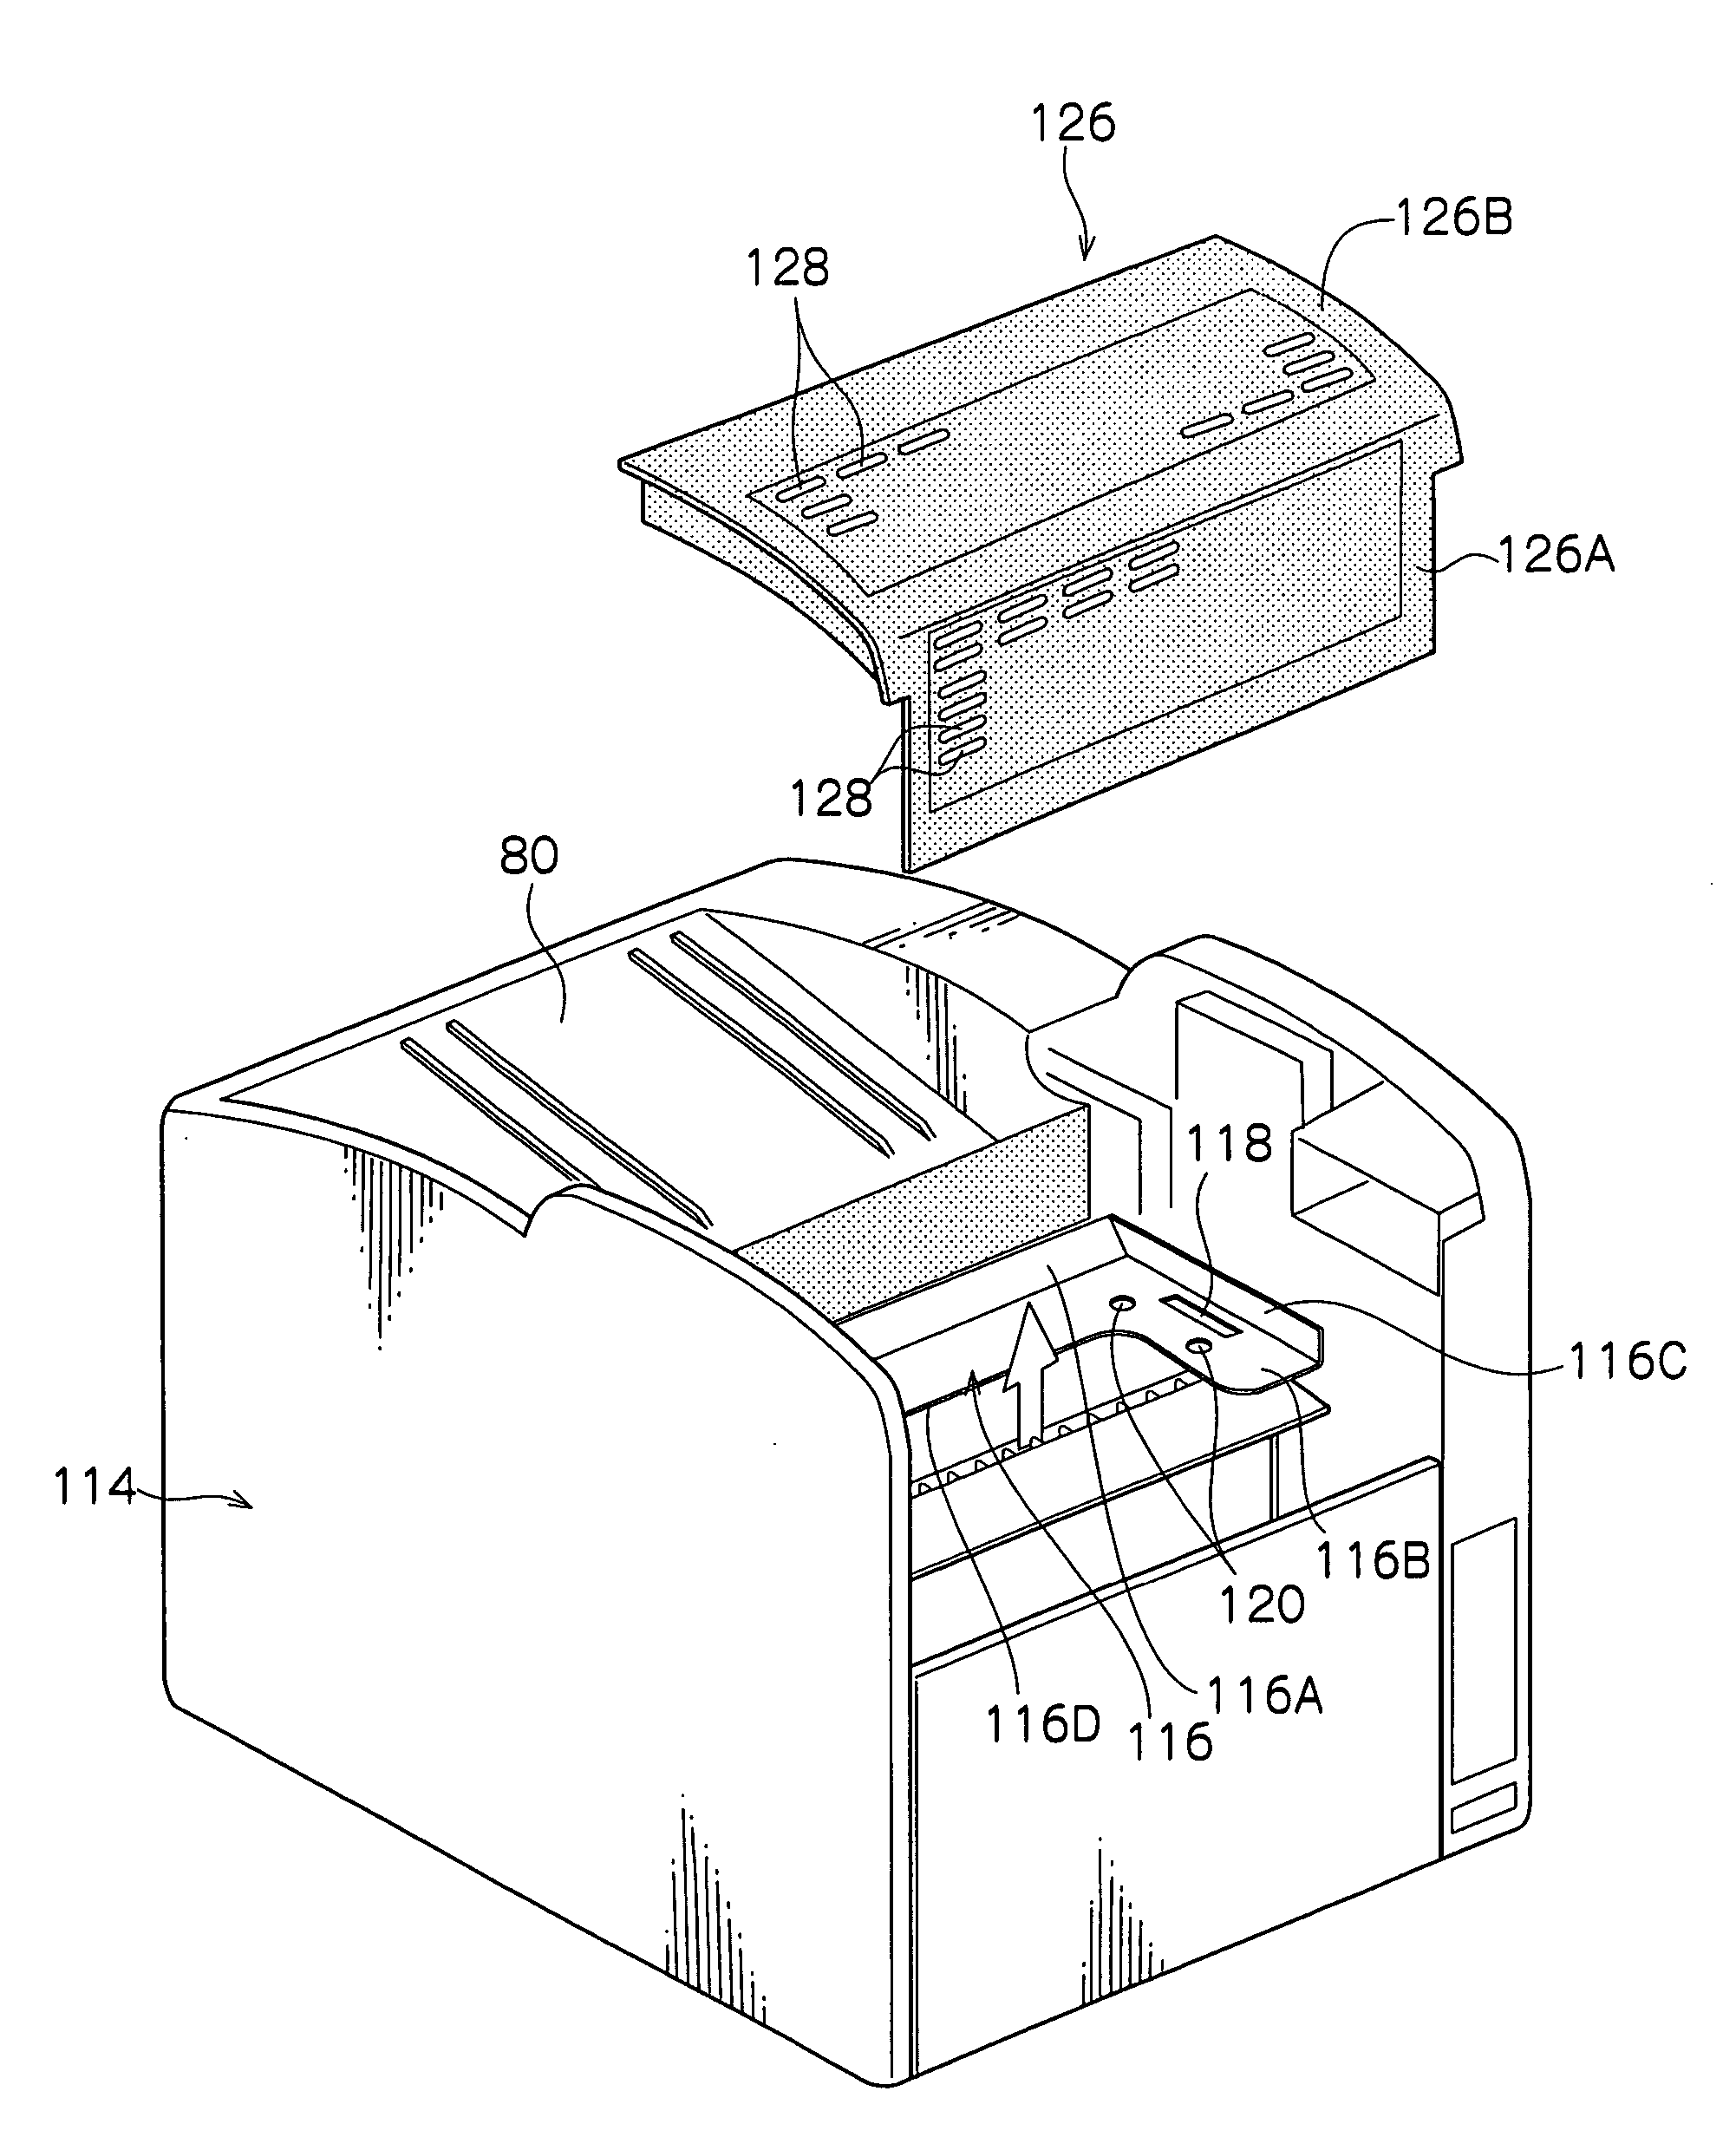 Image formation device